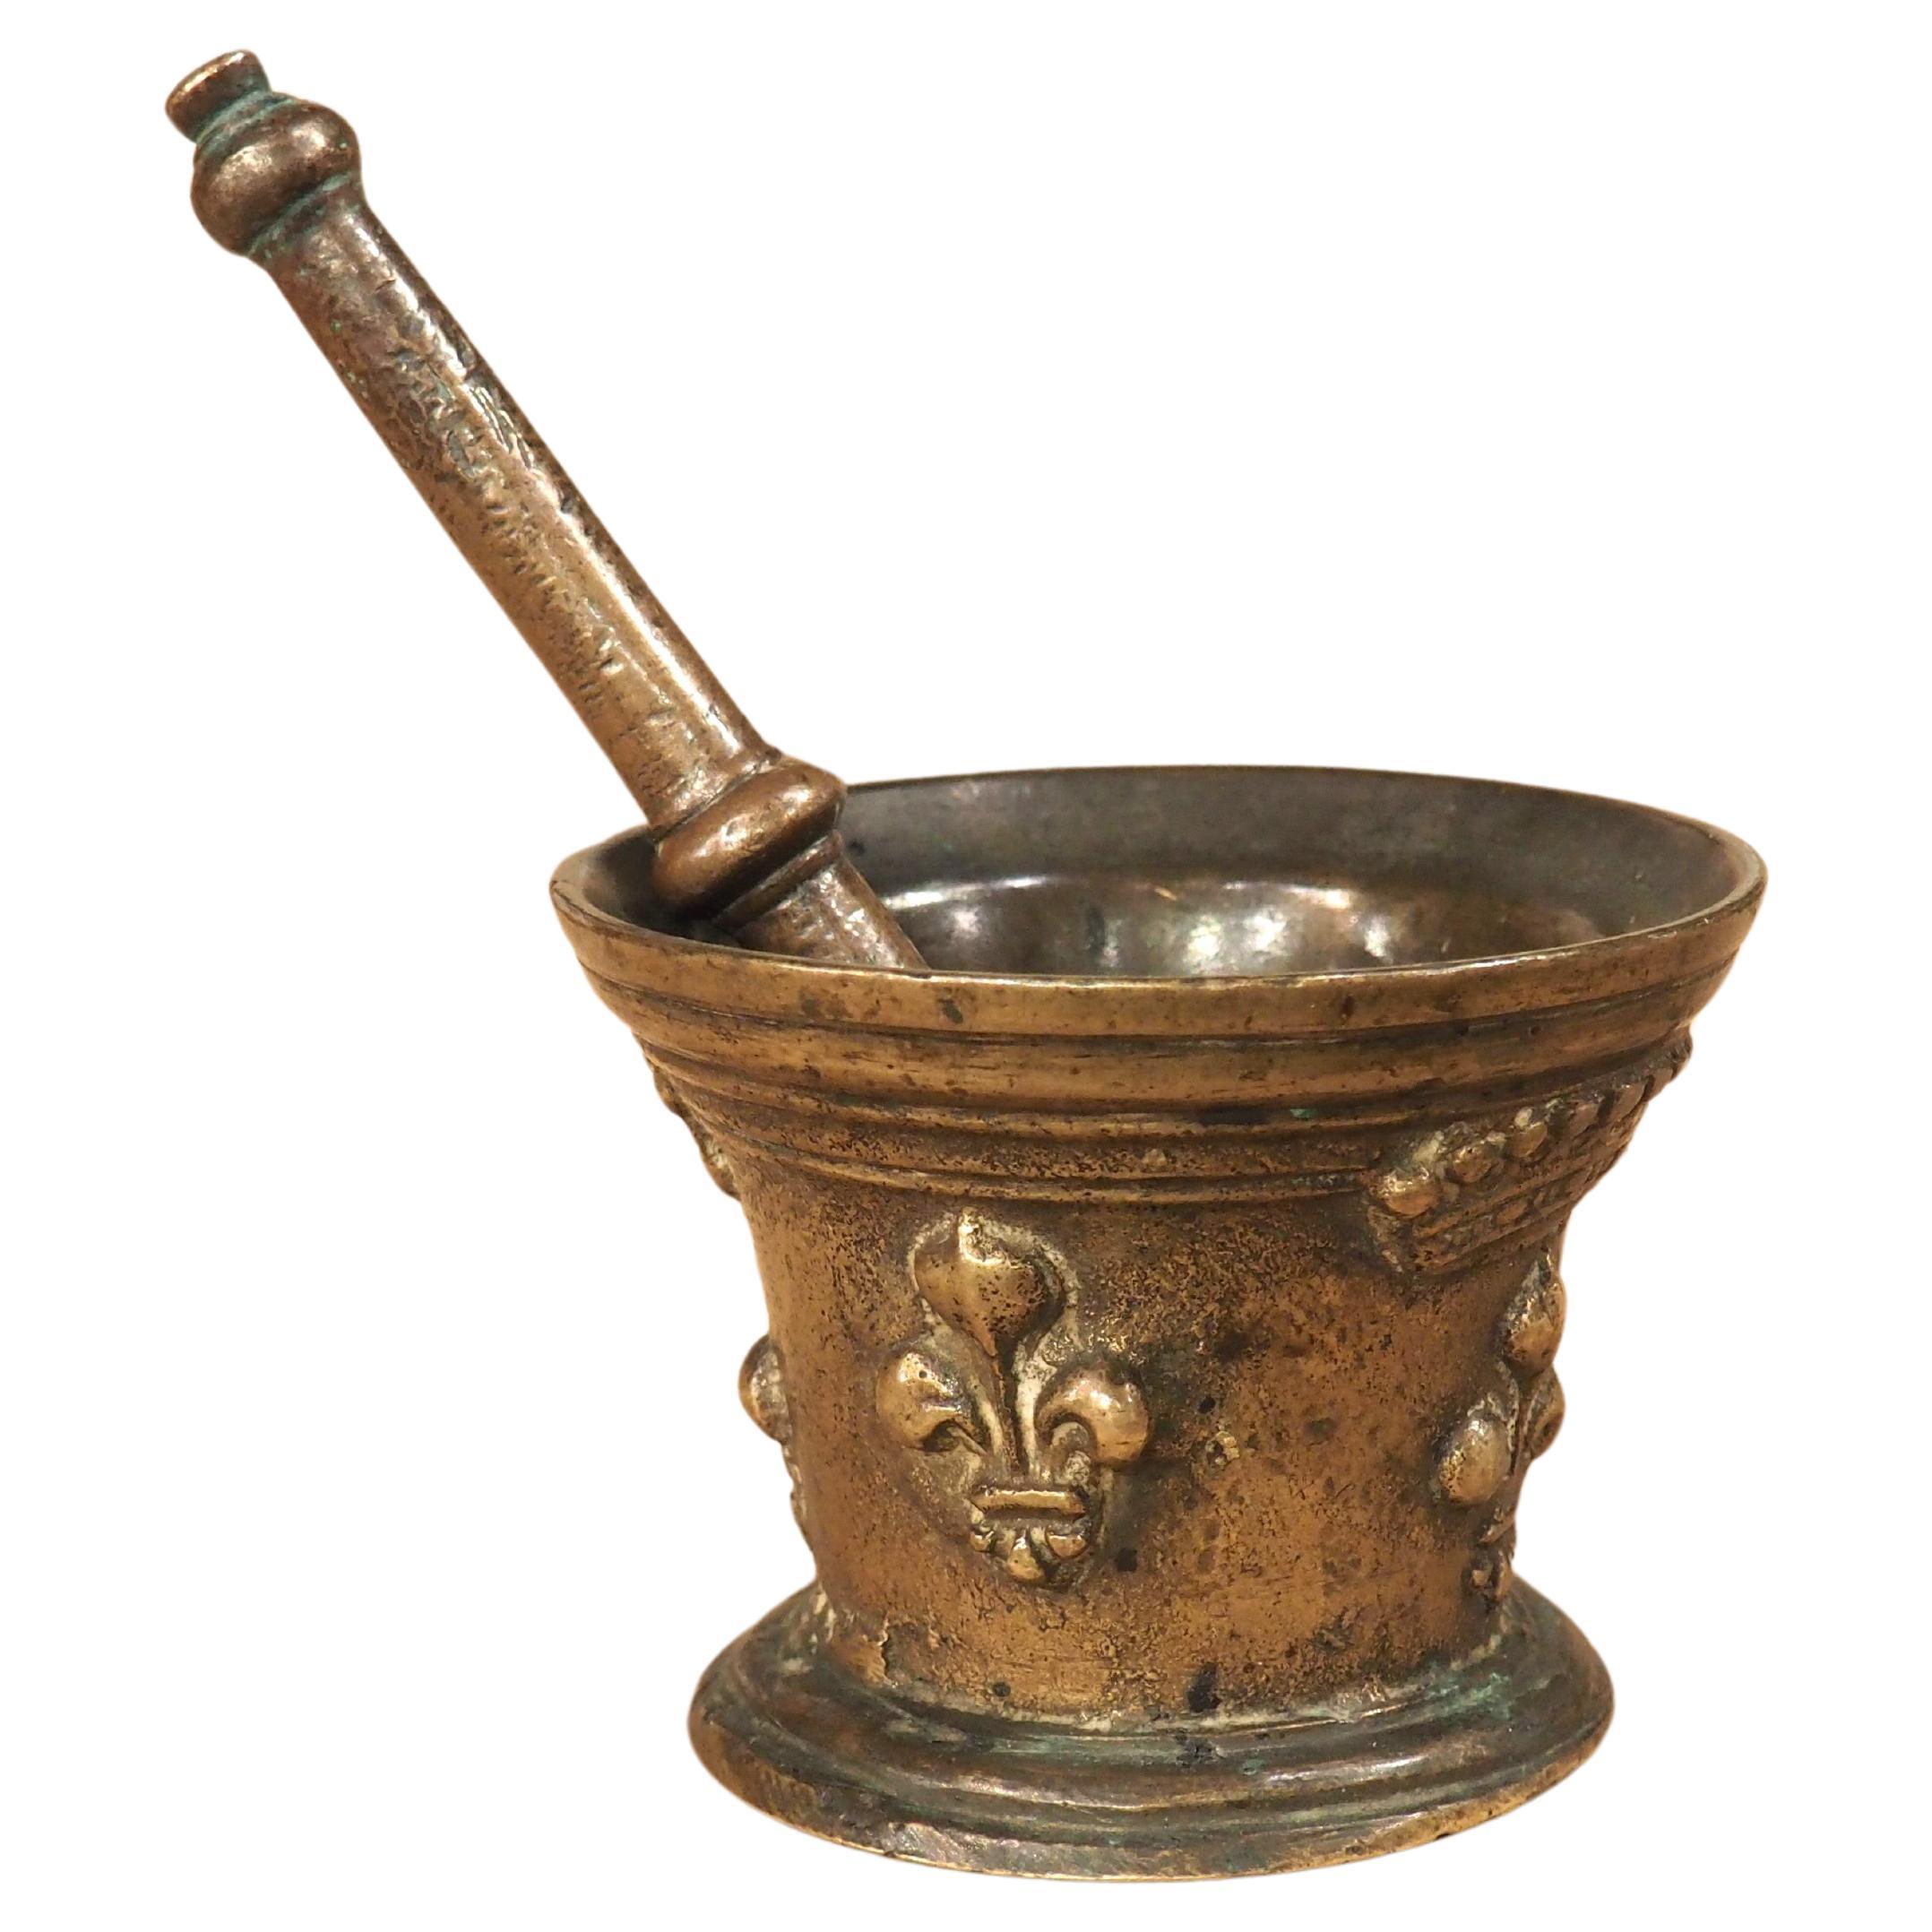 Small French Bronze Mortar and Pestle with Fleur De Lys and Crown, Circa 1700